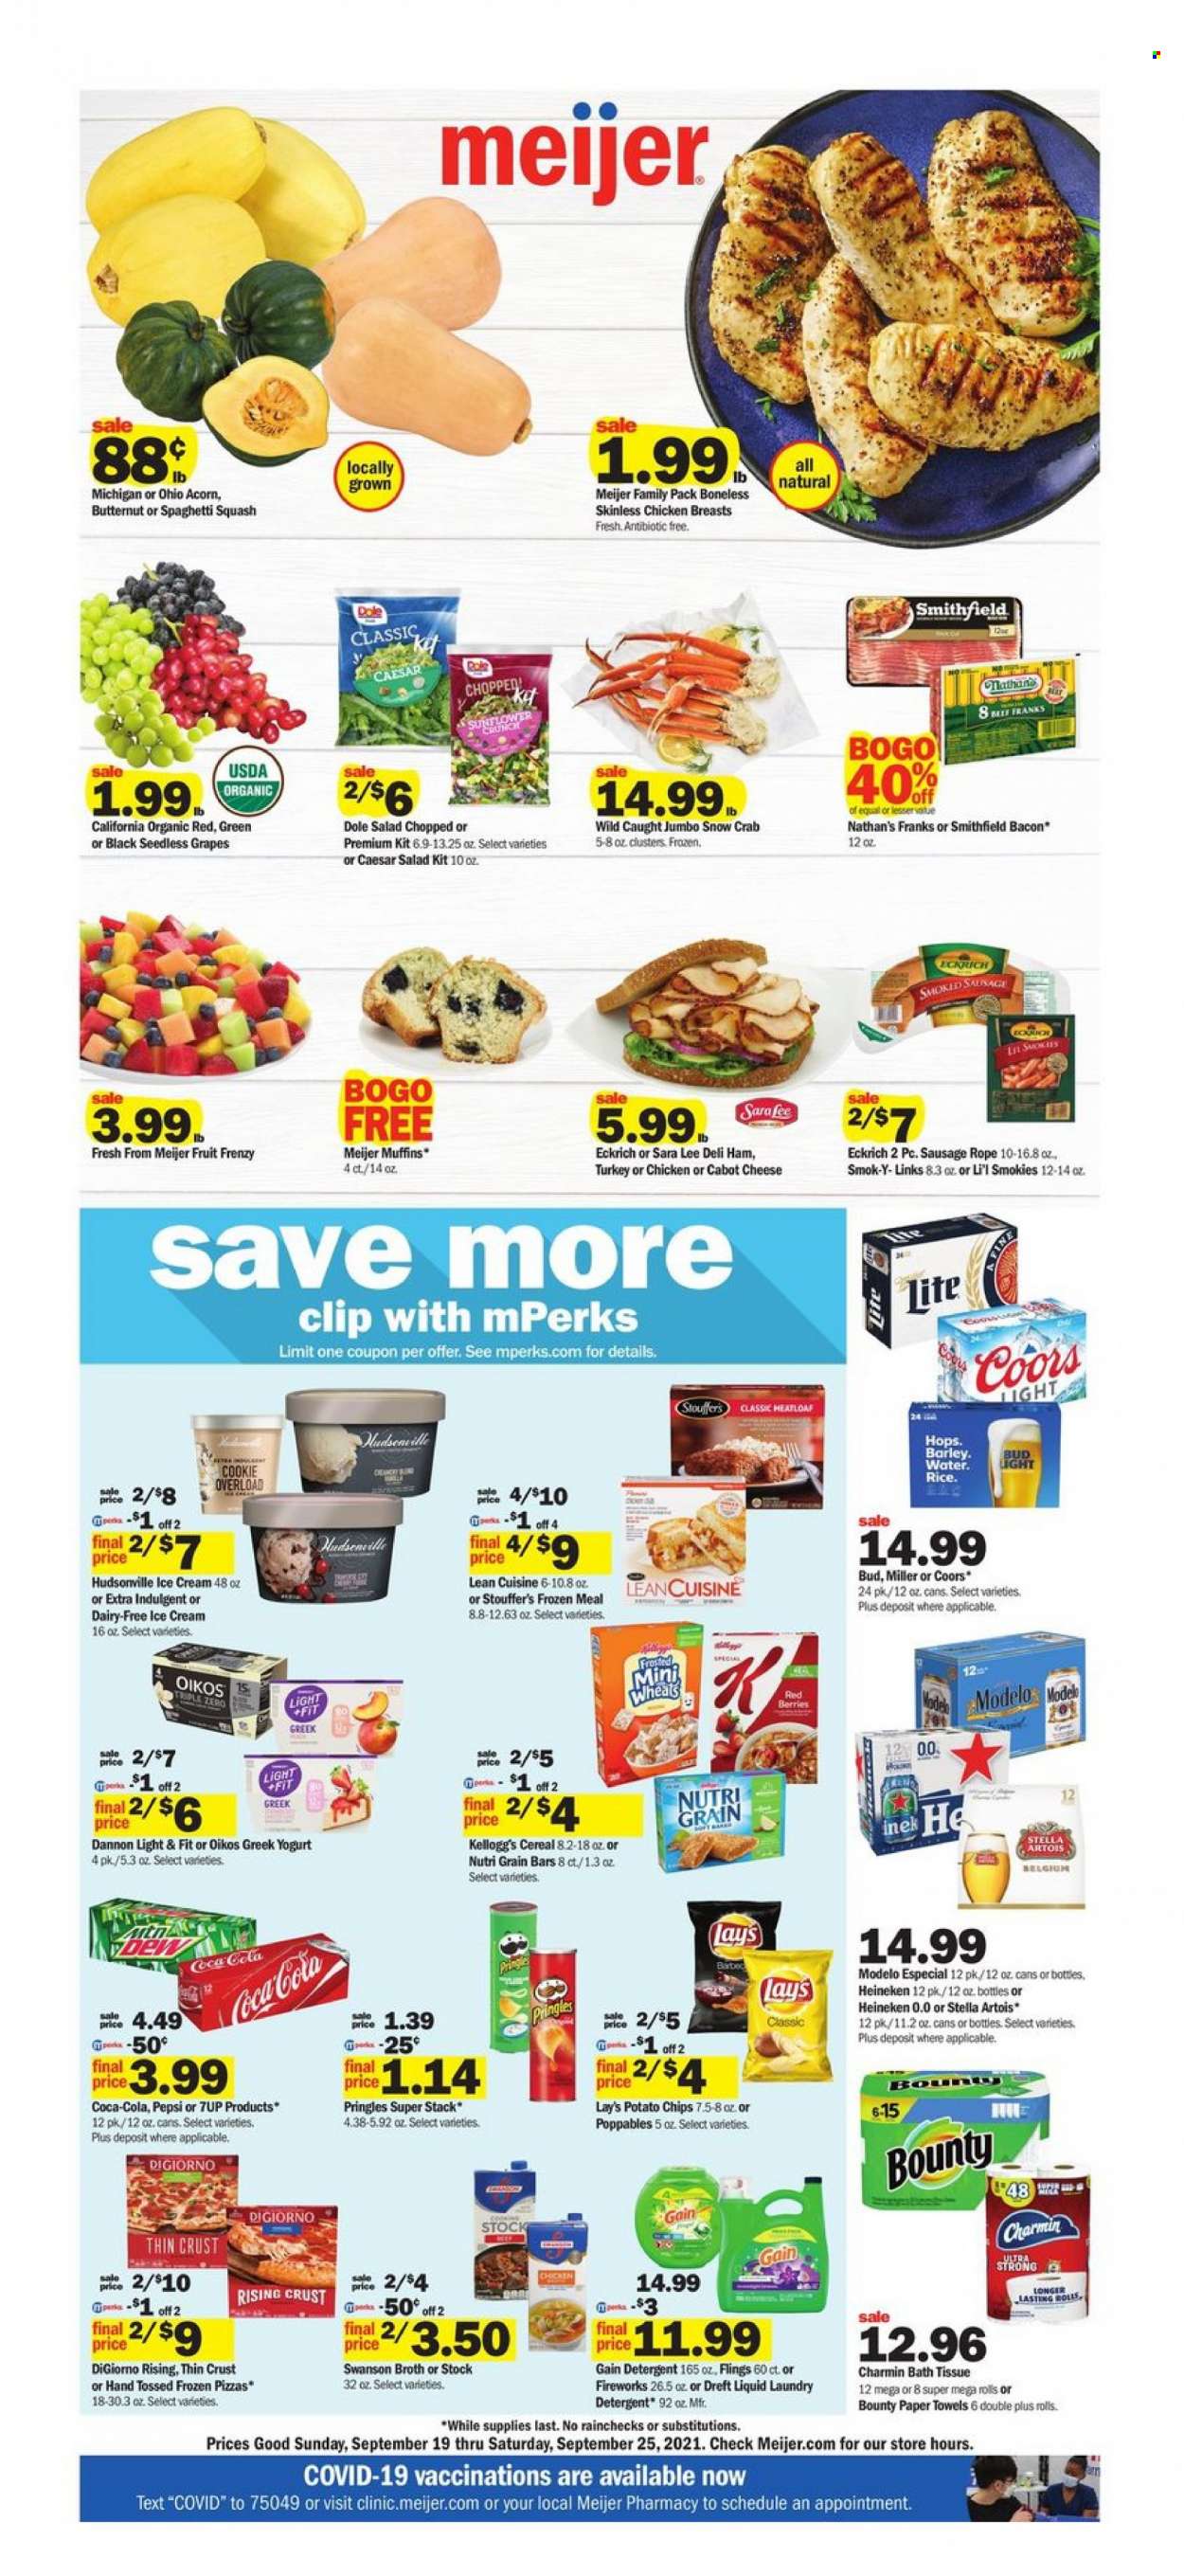 thumbnail - Meijer Flyer - 09/19/2021 - 09/25/2021 - Sales products - seedless grapes, Sara Lee, muffin, salad, Dole, grapes, crab, pizza, Lean Cuisine, bacon, ham, sausage, cheese, greek yoghurt, yoghurt, Oikos, Dannon, ice cream, Stouffer's, Bounty, Kellogg's, potato chips, Pringles, Lay’s, broth, cereals, Nutri-Grain, Coca-Cola, Pepsi, 7UP, beer, Heineken, Miller, Modelo, chicken breasts, bath tissue, kitchen towels, paper towels, Charmin, detergent, Gain, laundry detergent, butternut squash, Stella Artois, Coors. Page 1.